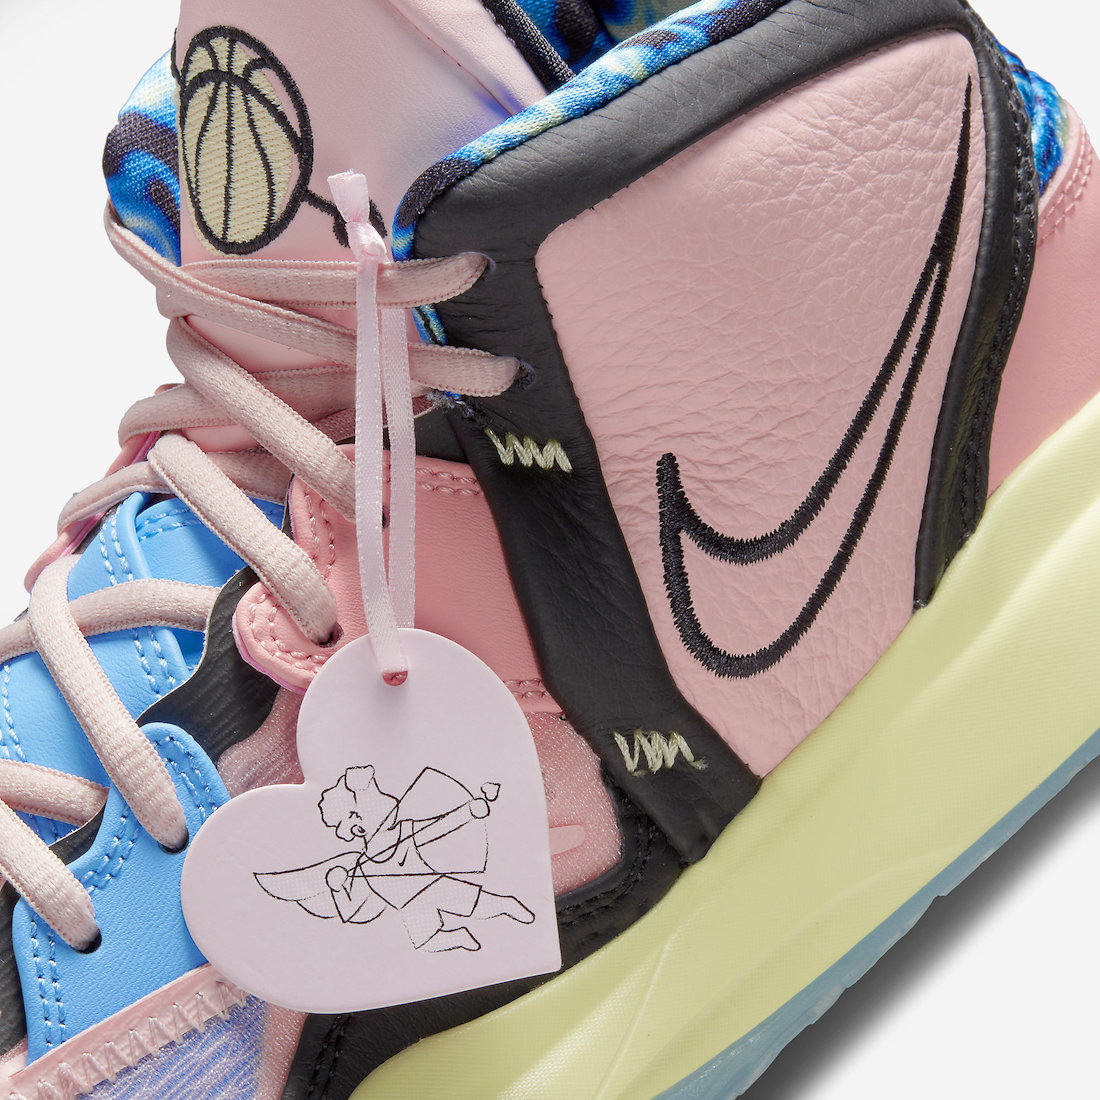 Nike Kyrie 8 Valentines Day DH5385-900 Release Date Info